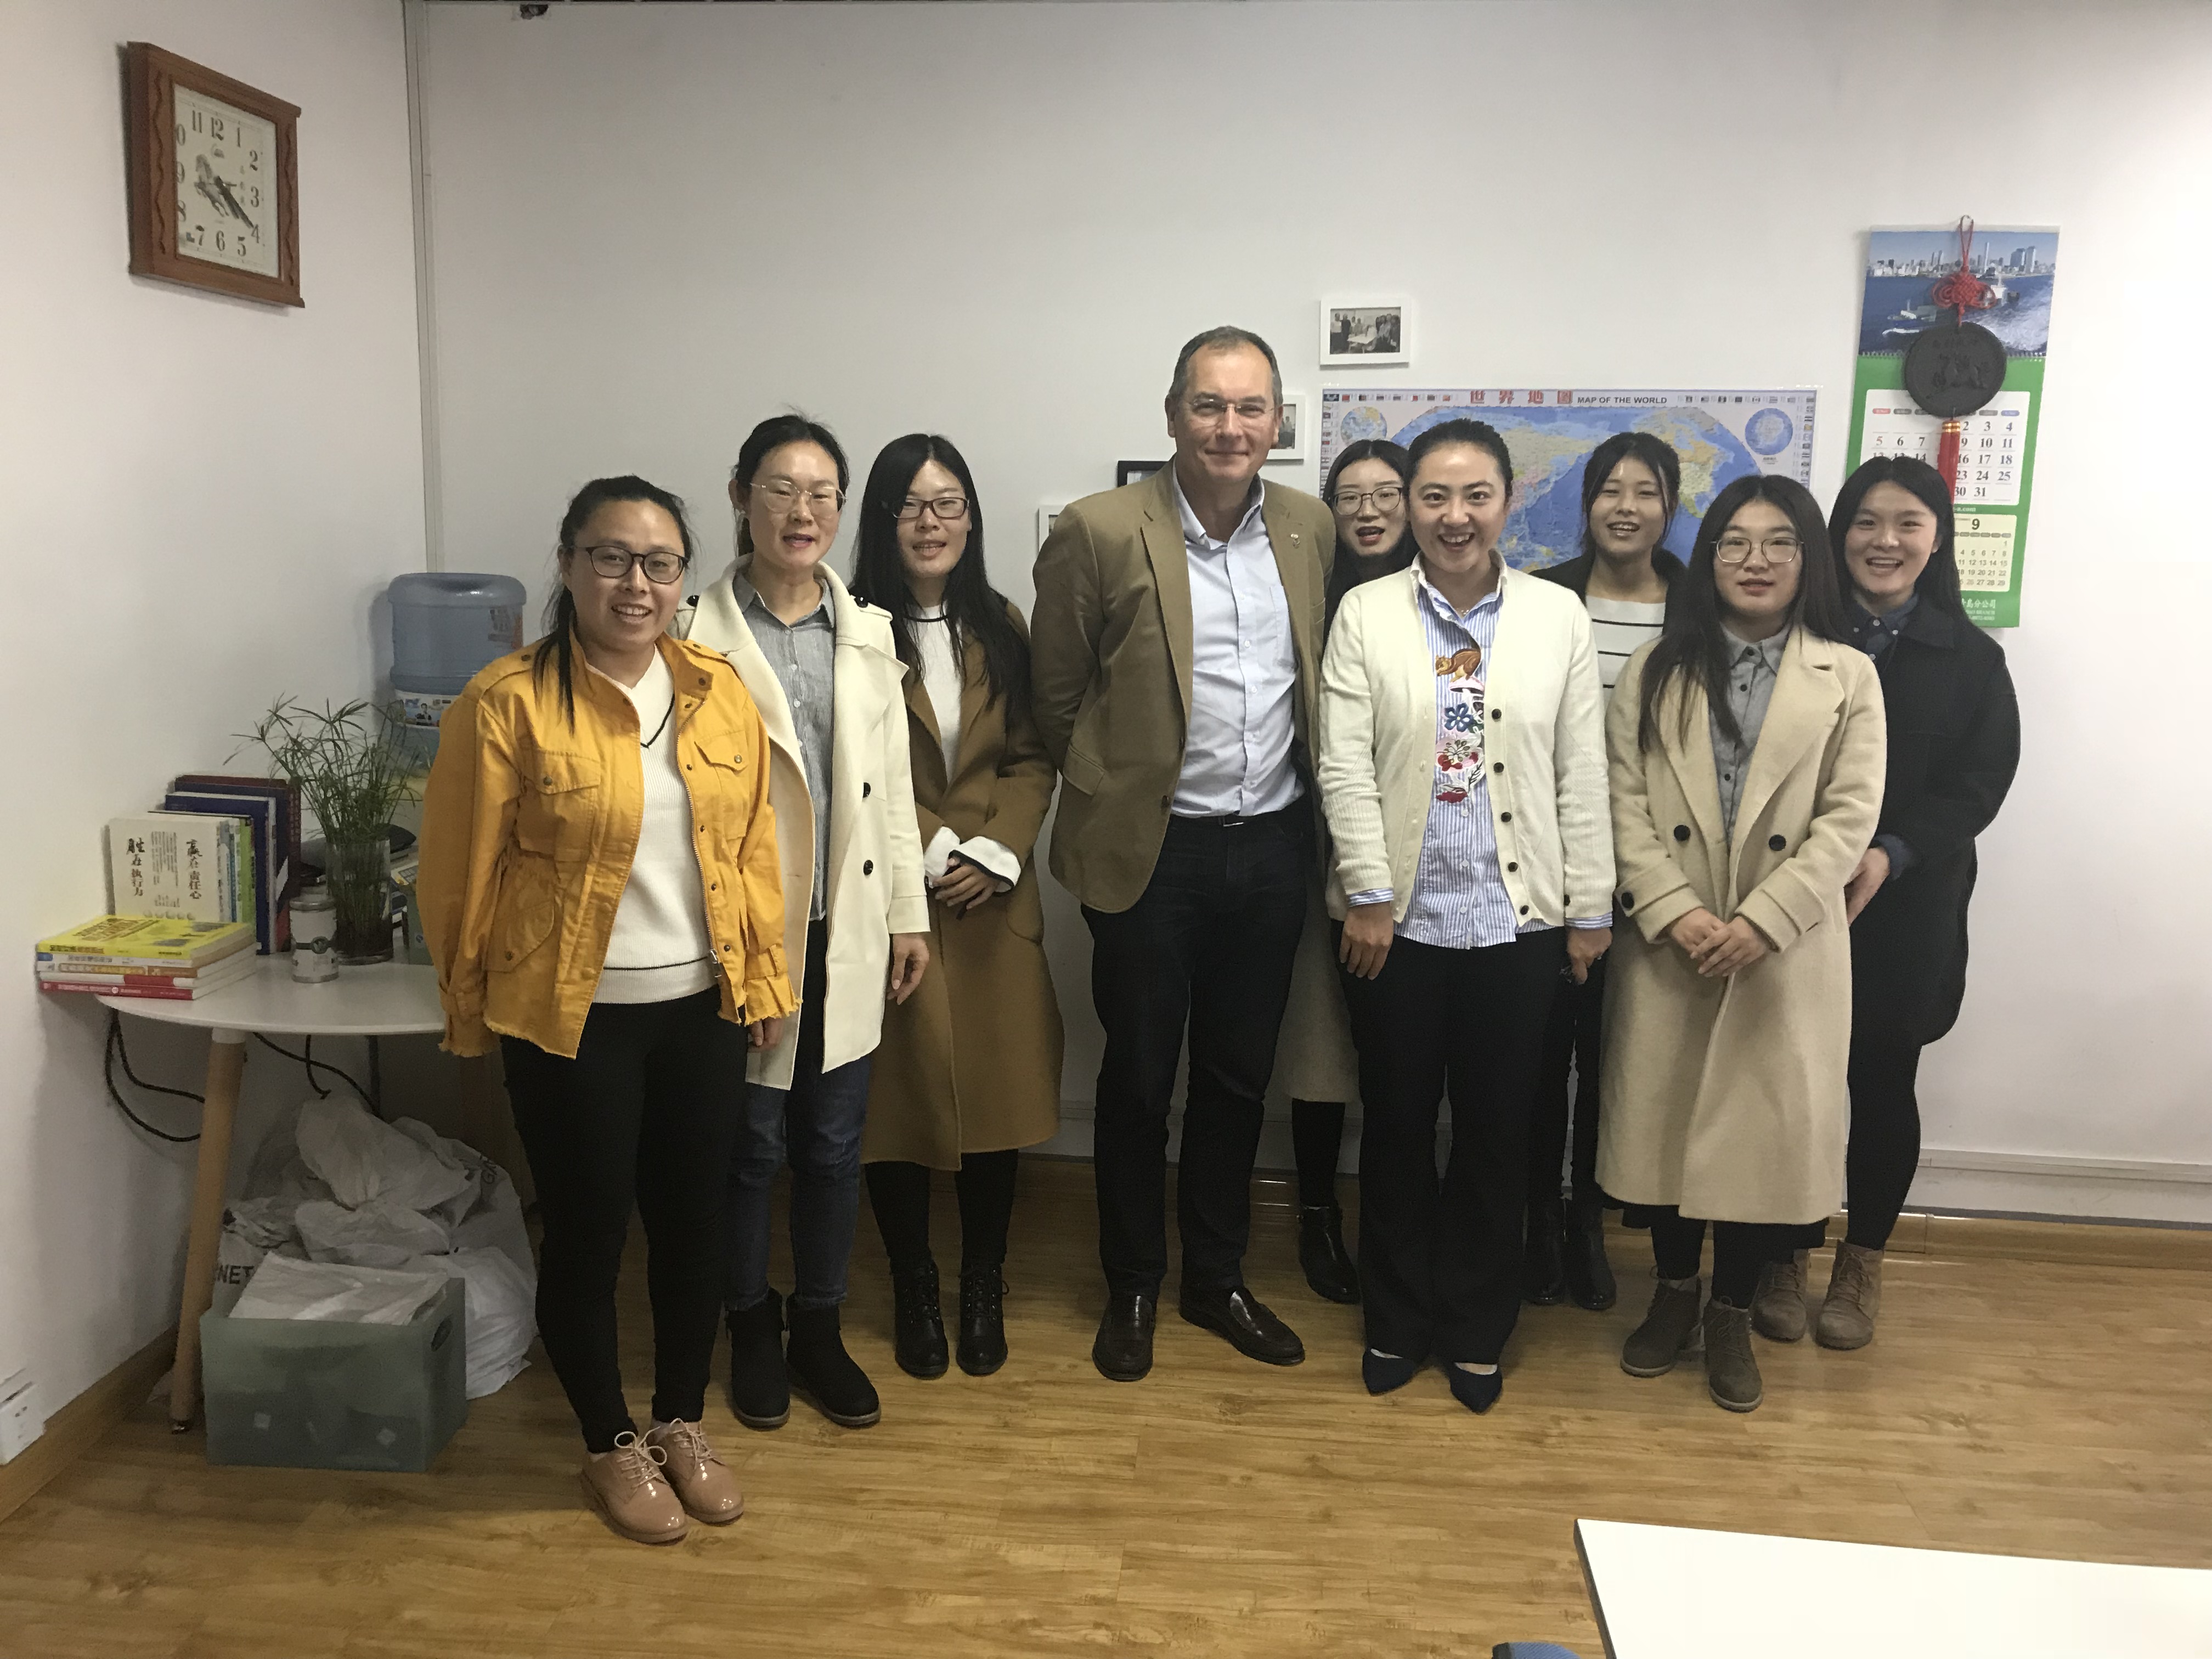 Our French customer visited us on October 30, 2018,we have a good communication about garnet sand